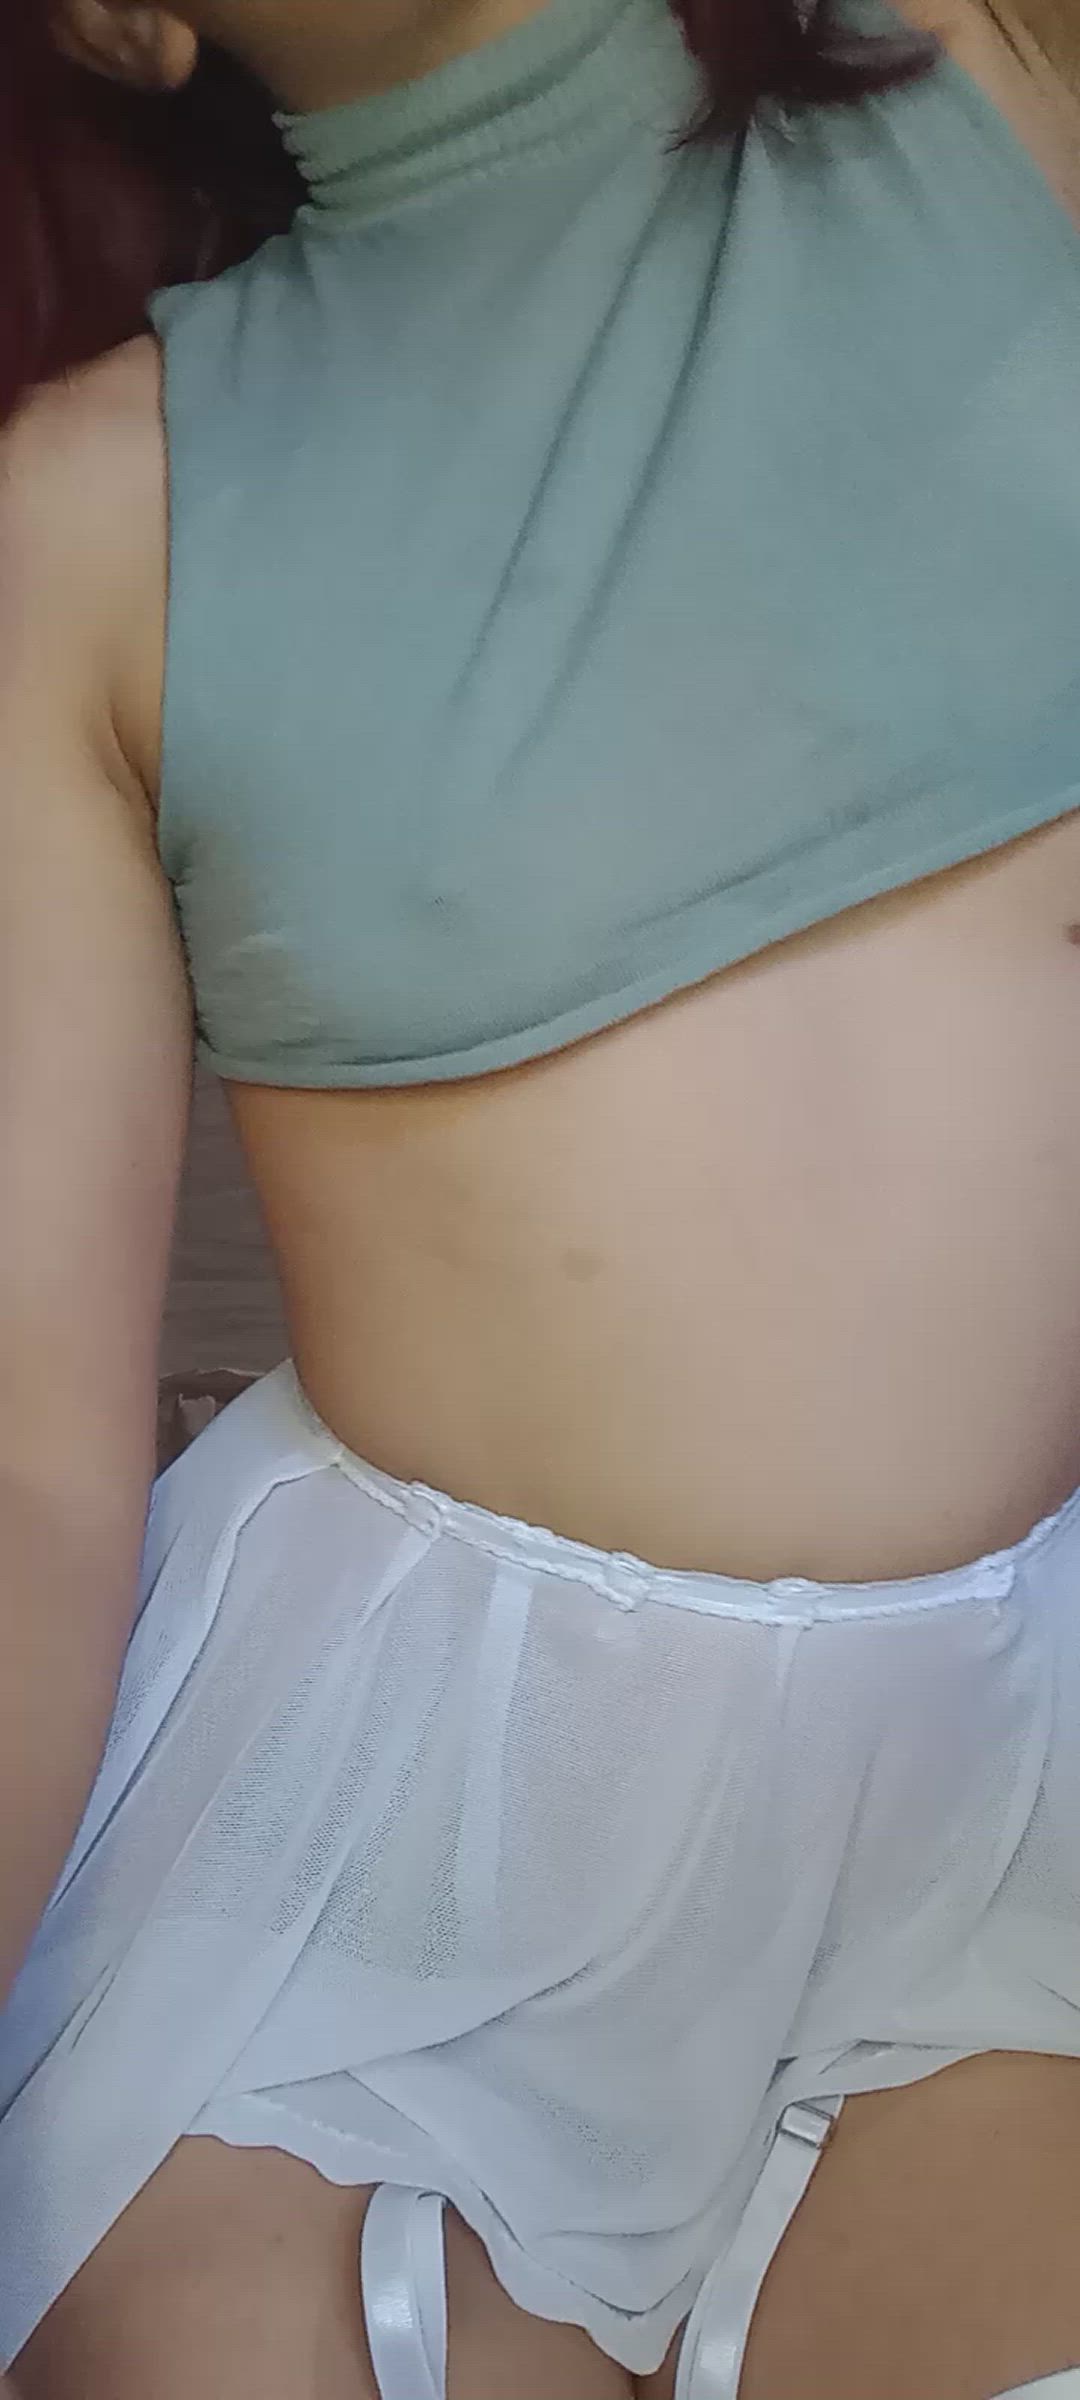 Amateur porn video with onlyfans model mikasa-waif <strong>@mikasawaif</strong>